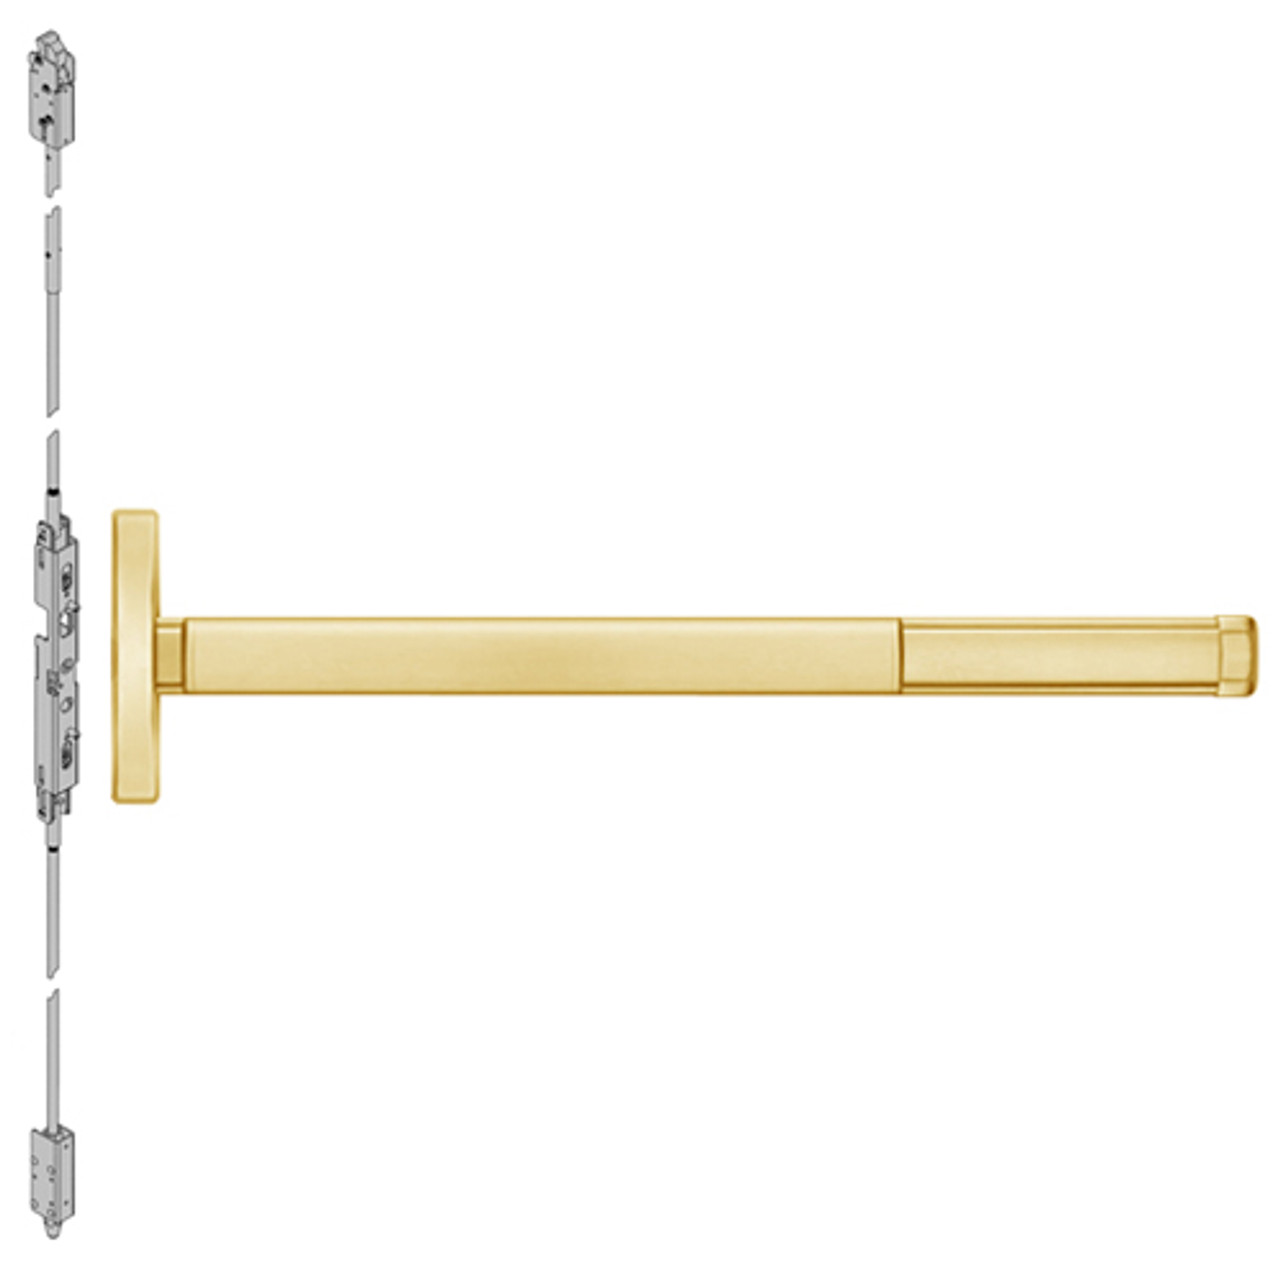 FL2614LBR-605-36 PHI 2600 Series Fire Rated Concealed Vertical Rod Exit Device Prepped for Lever Always Active with Less Bottom Rod in Bright Brass Finish